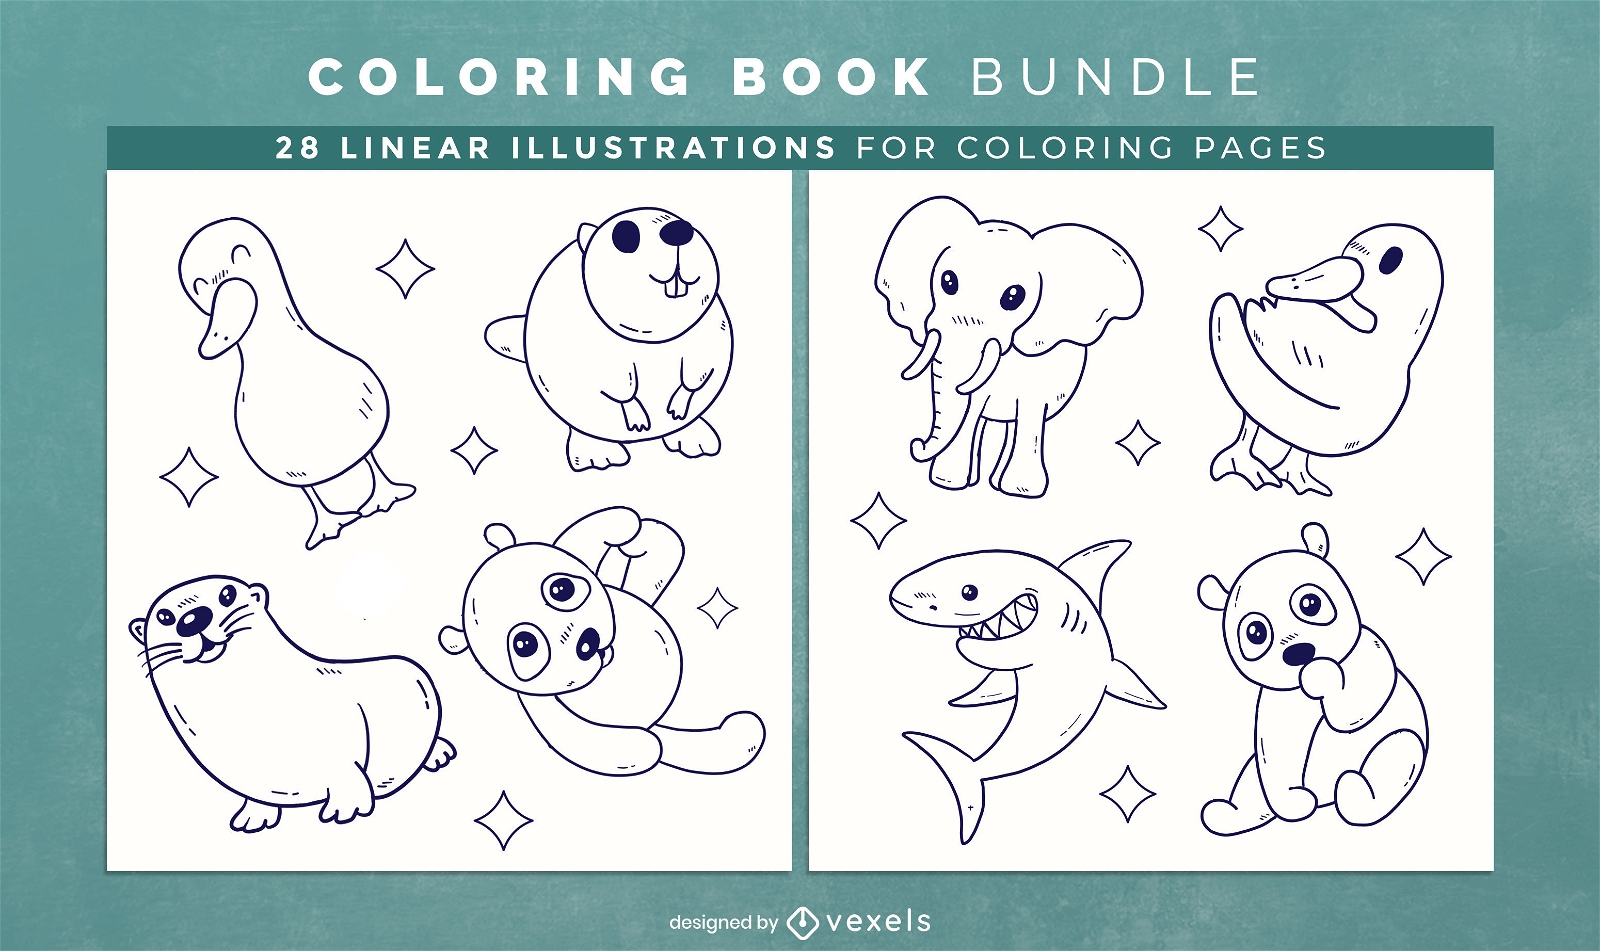 Cute animals coloring book pages design